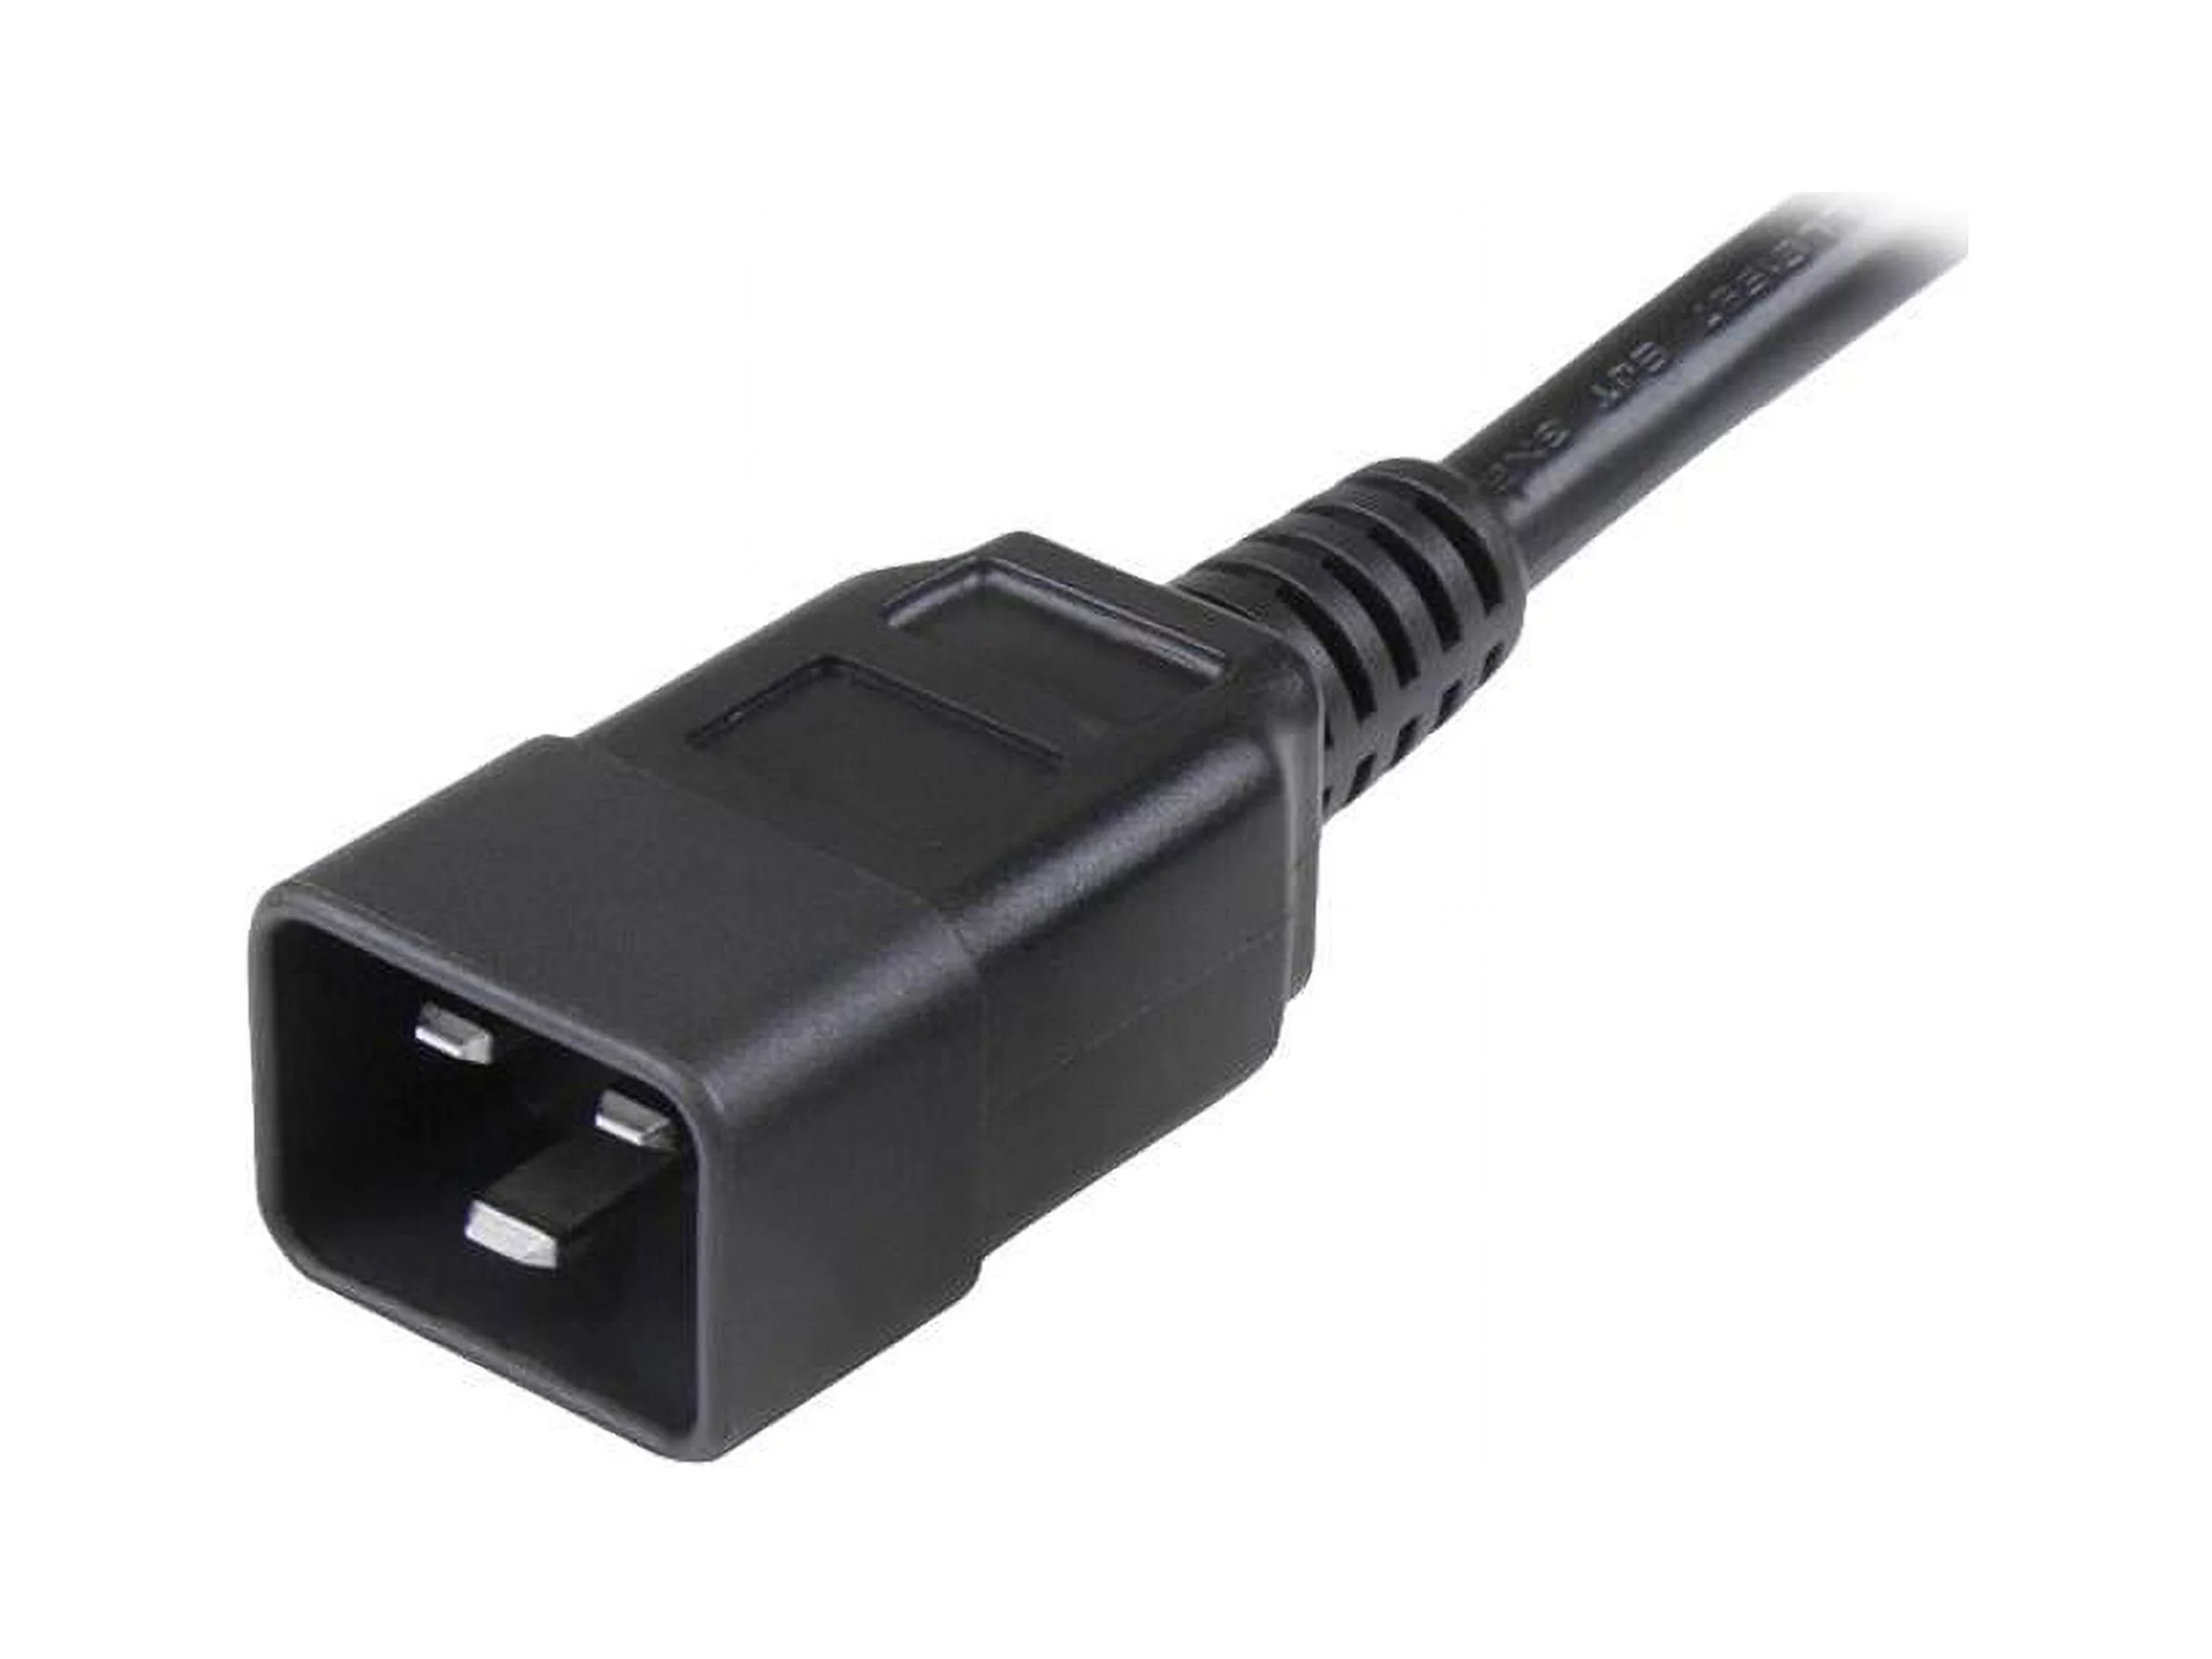 Computer power cord - C19 to C20, 14 AWG, 3 ft